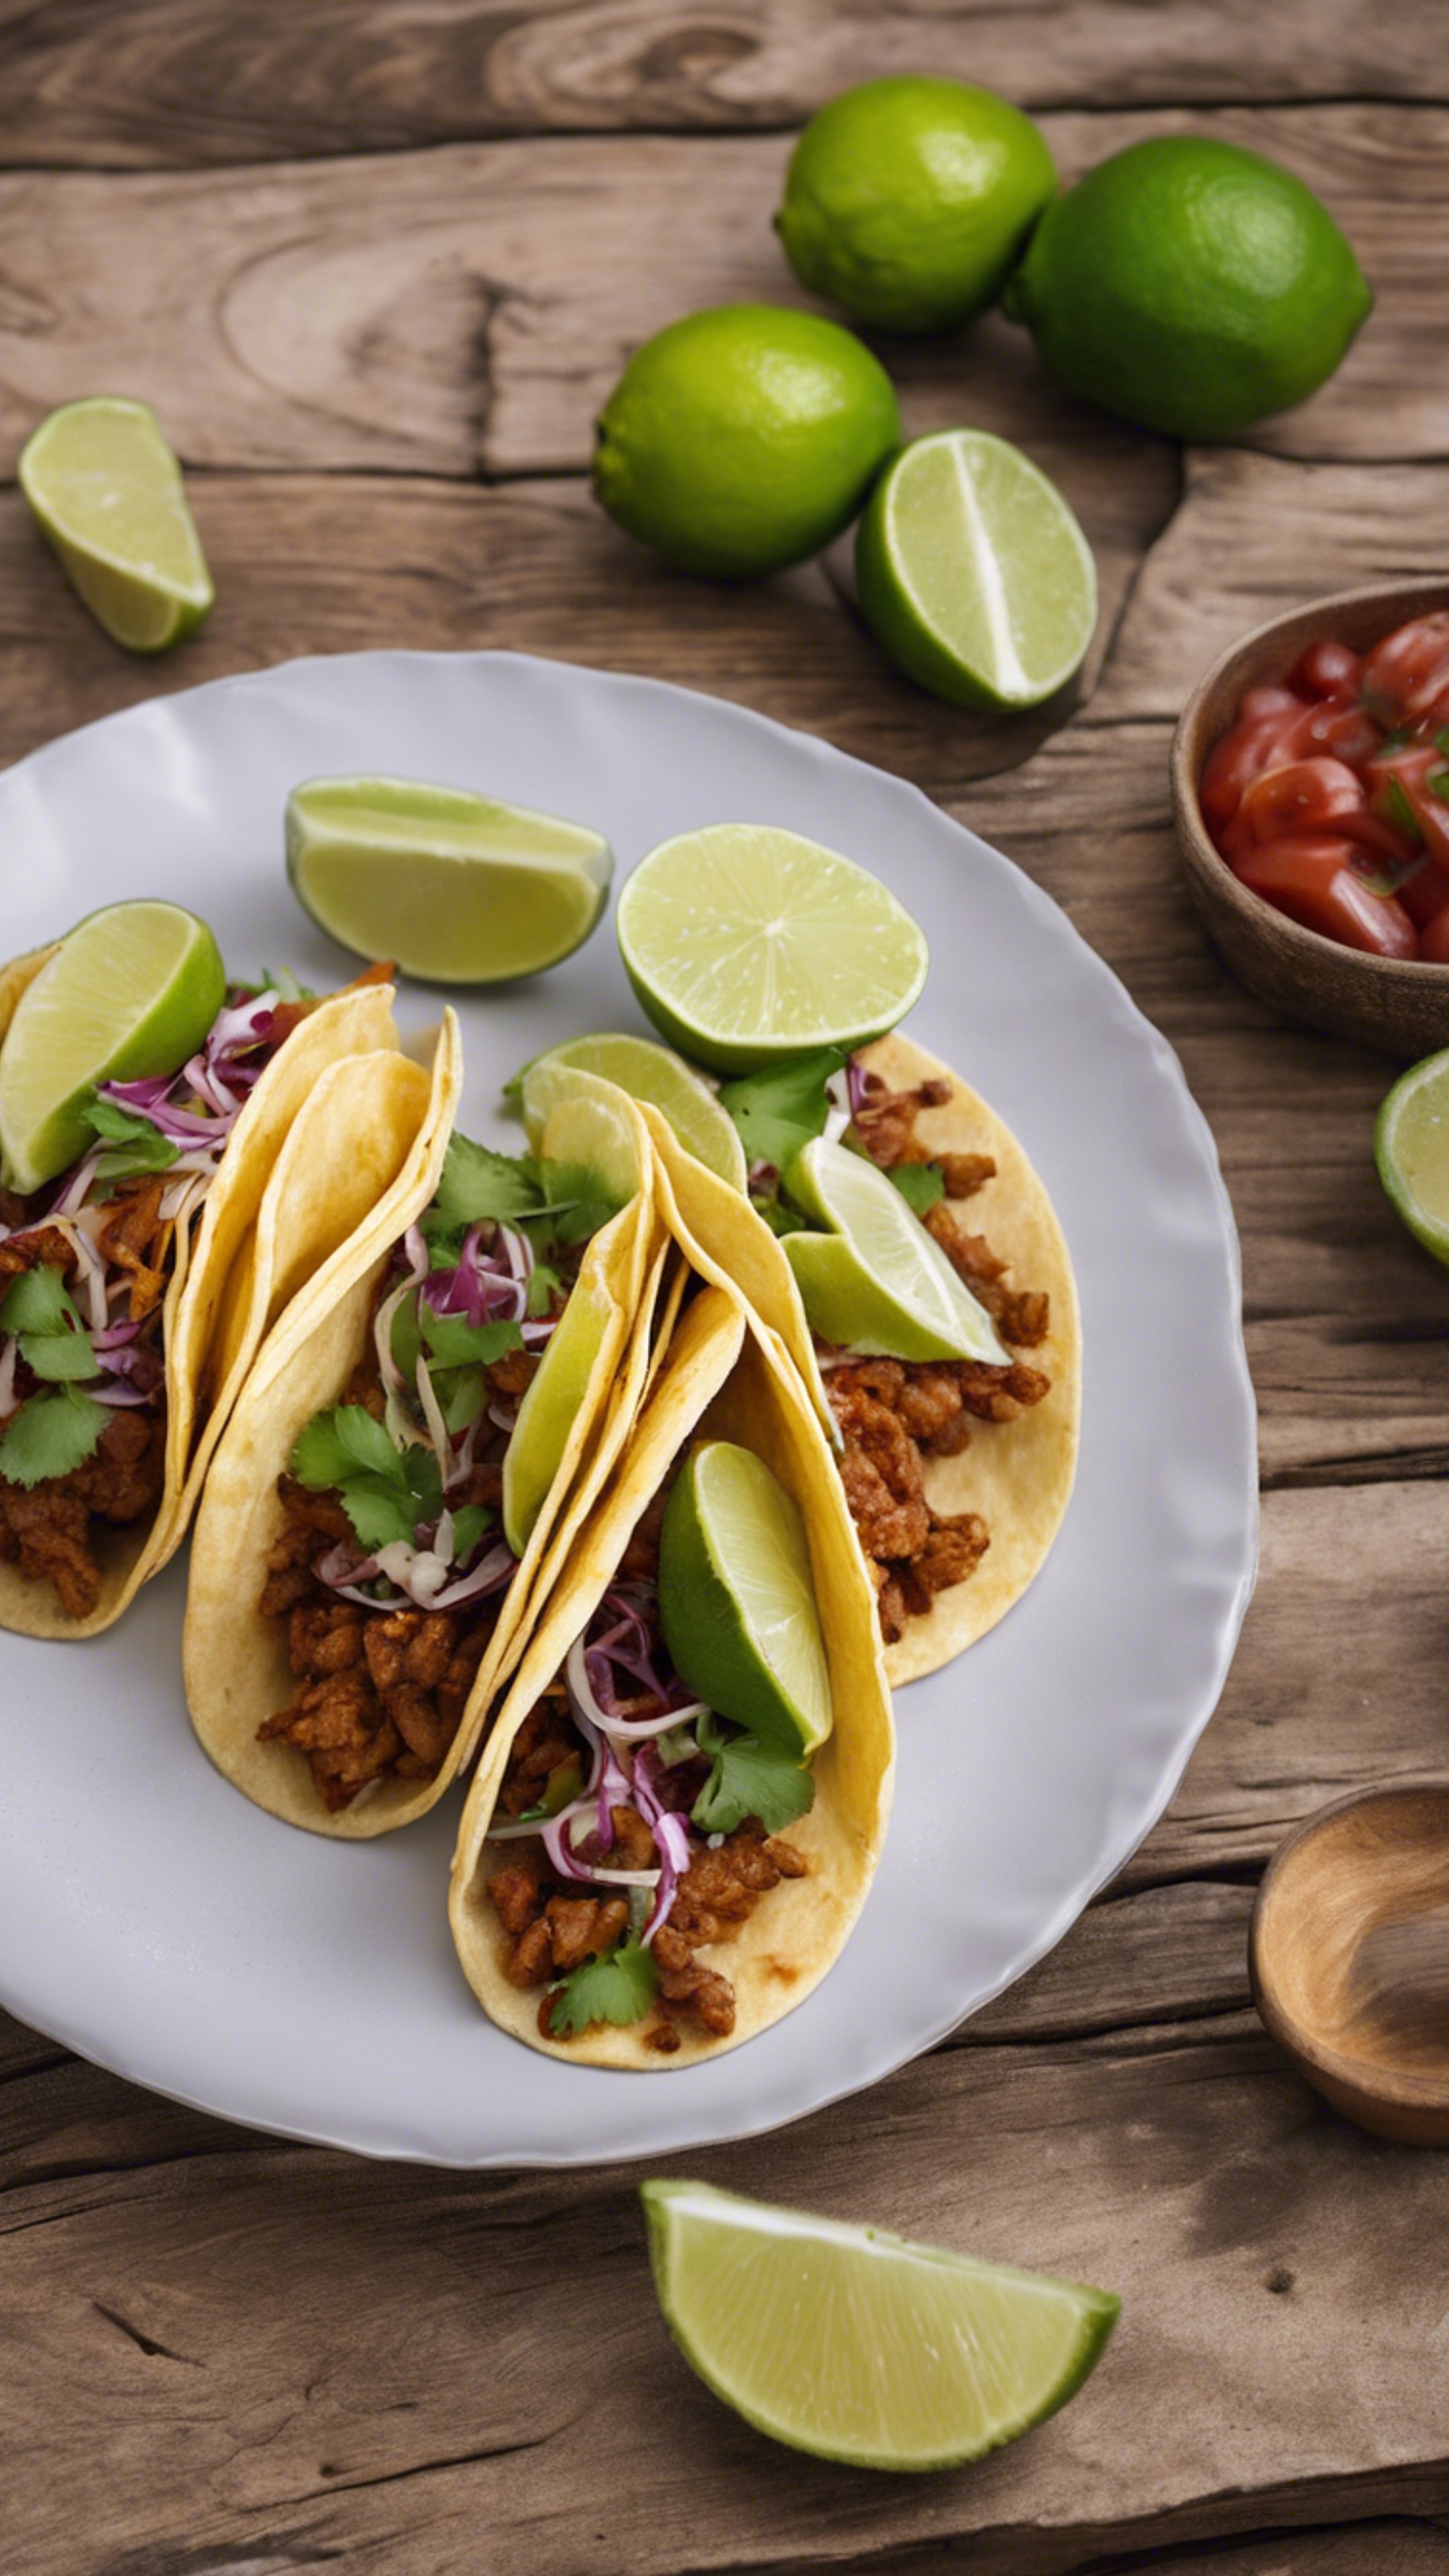 A plate of tacos garnished with fresh lime wedges on a rustic wooden table. Wallpaper[5f6c6b777f9c4d0caf3c]